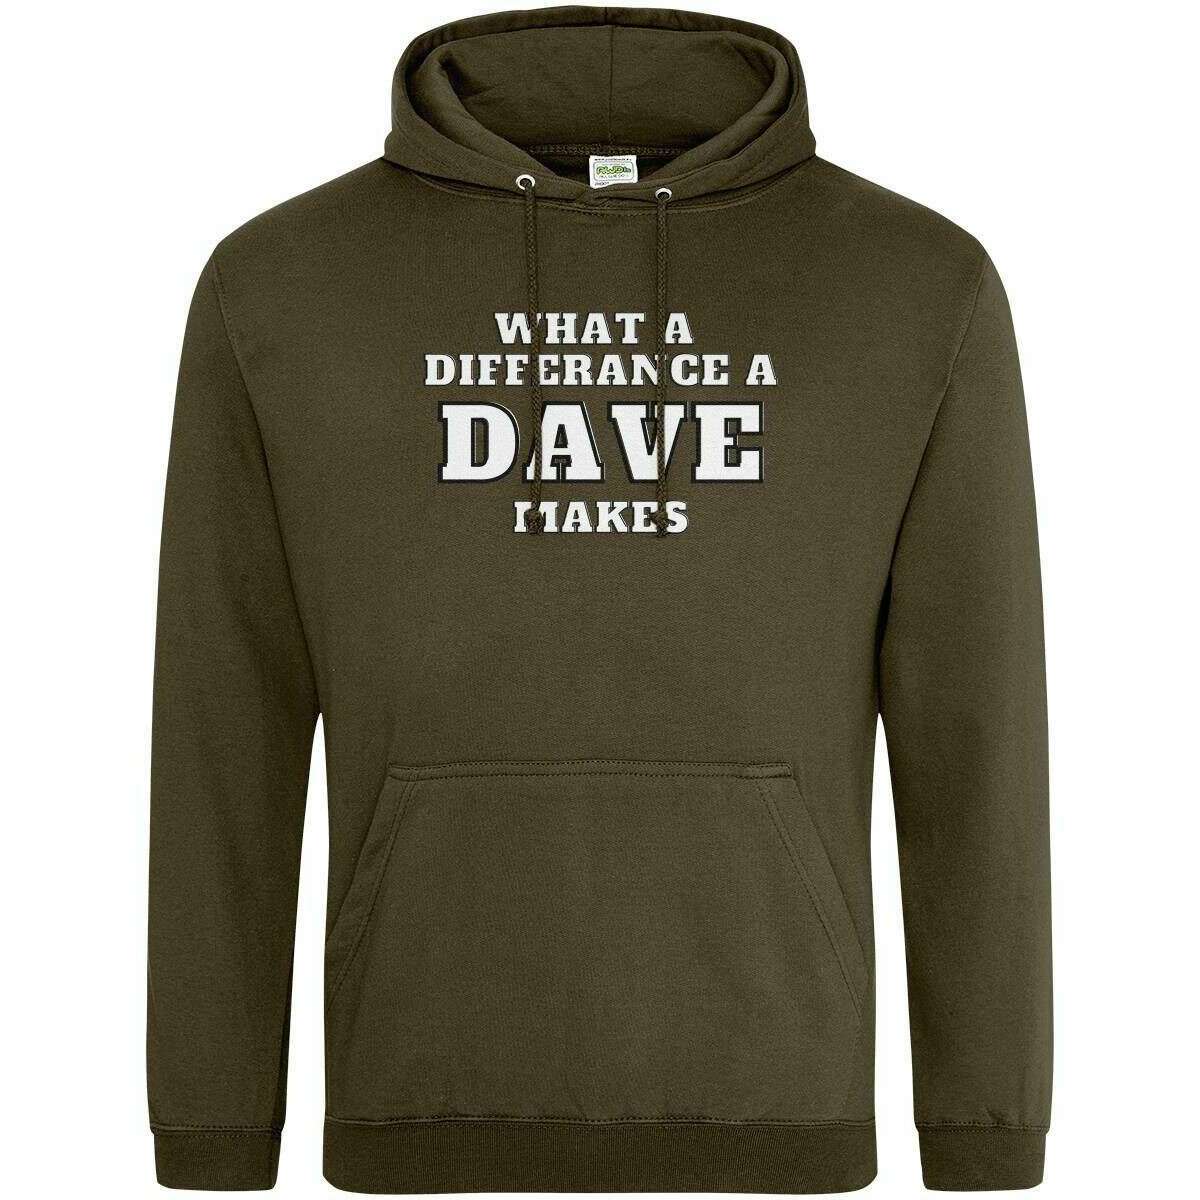 Teemarkable! What A Difference a Dave Makes Hoodie